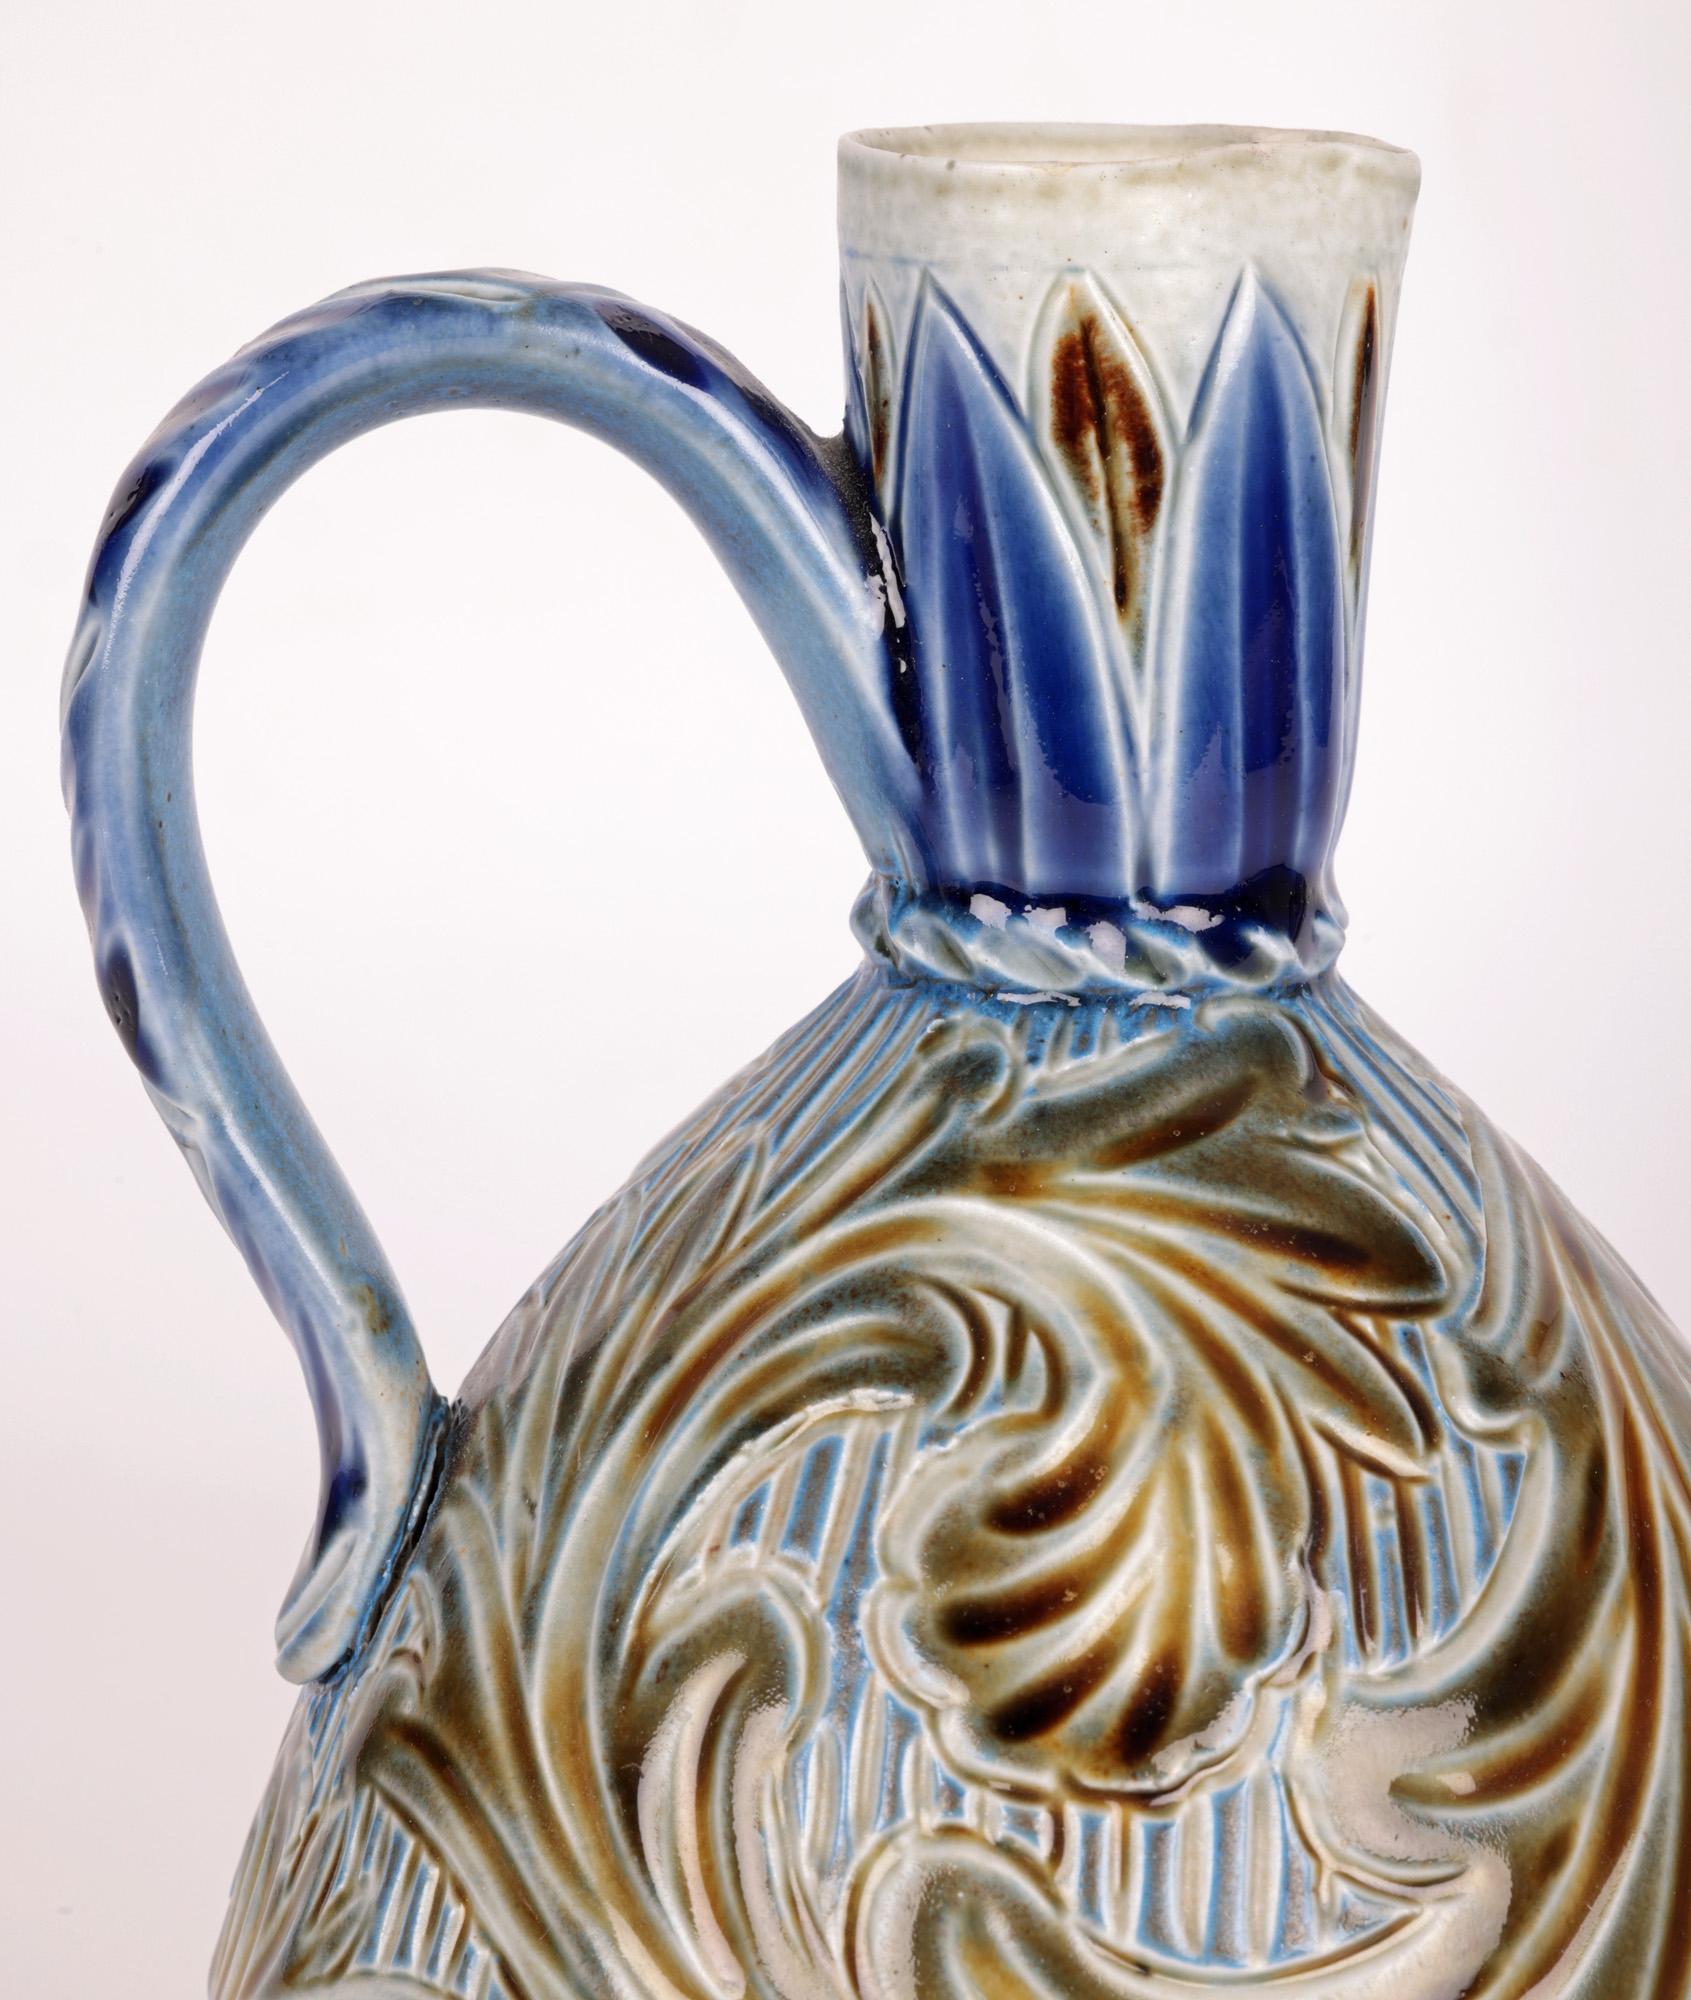 A very stylish and early Doulton Lambeth Art Pottery jug decorated with stylized scrolling leaf designs  by highly renowned artist Frank A Butler and dated 1873. The stoneware jug is of rounded bulbous shape standing on a narrow round foot and tall